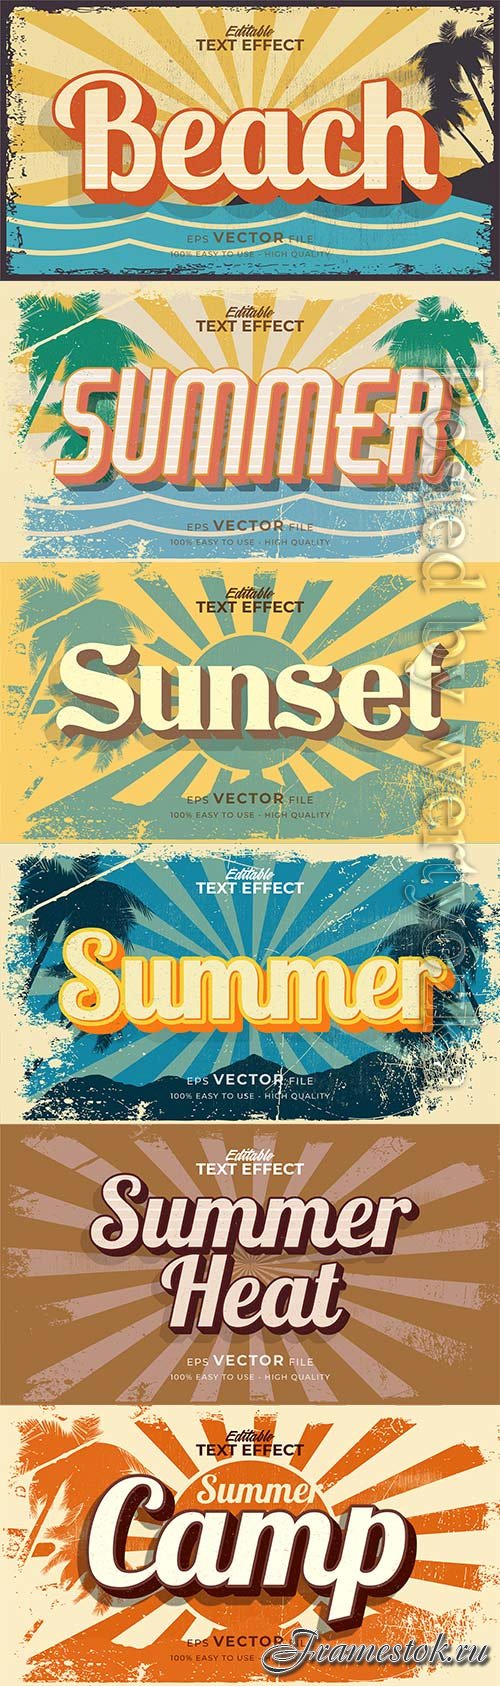 Text style effect, retro summer text in grunge style